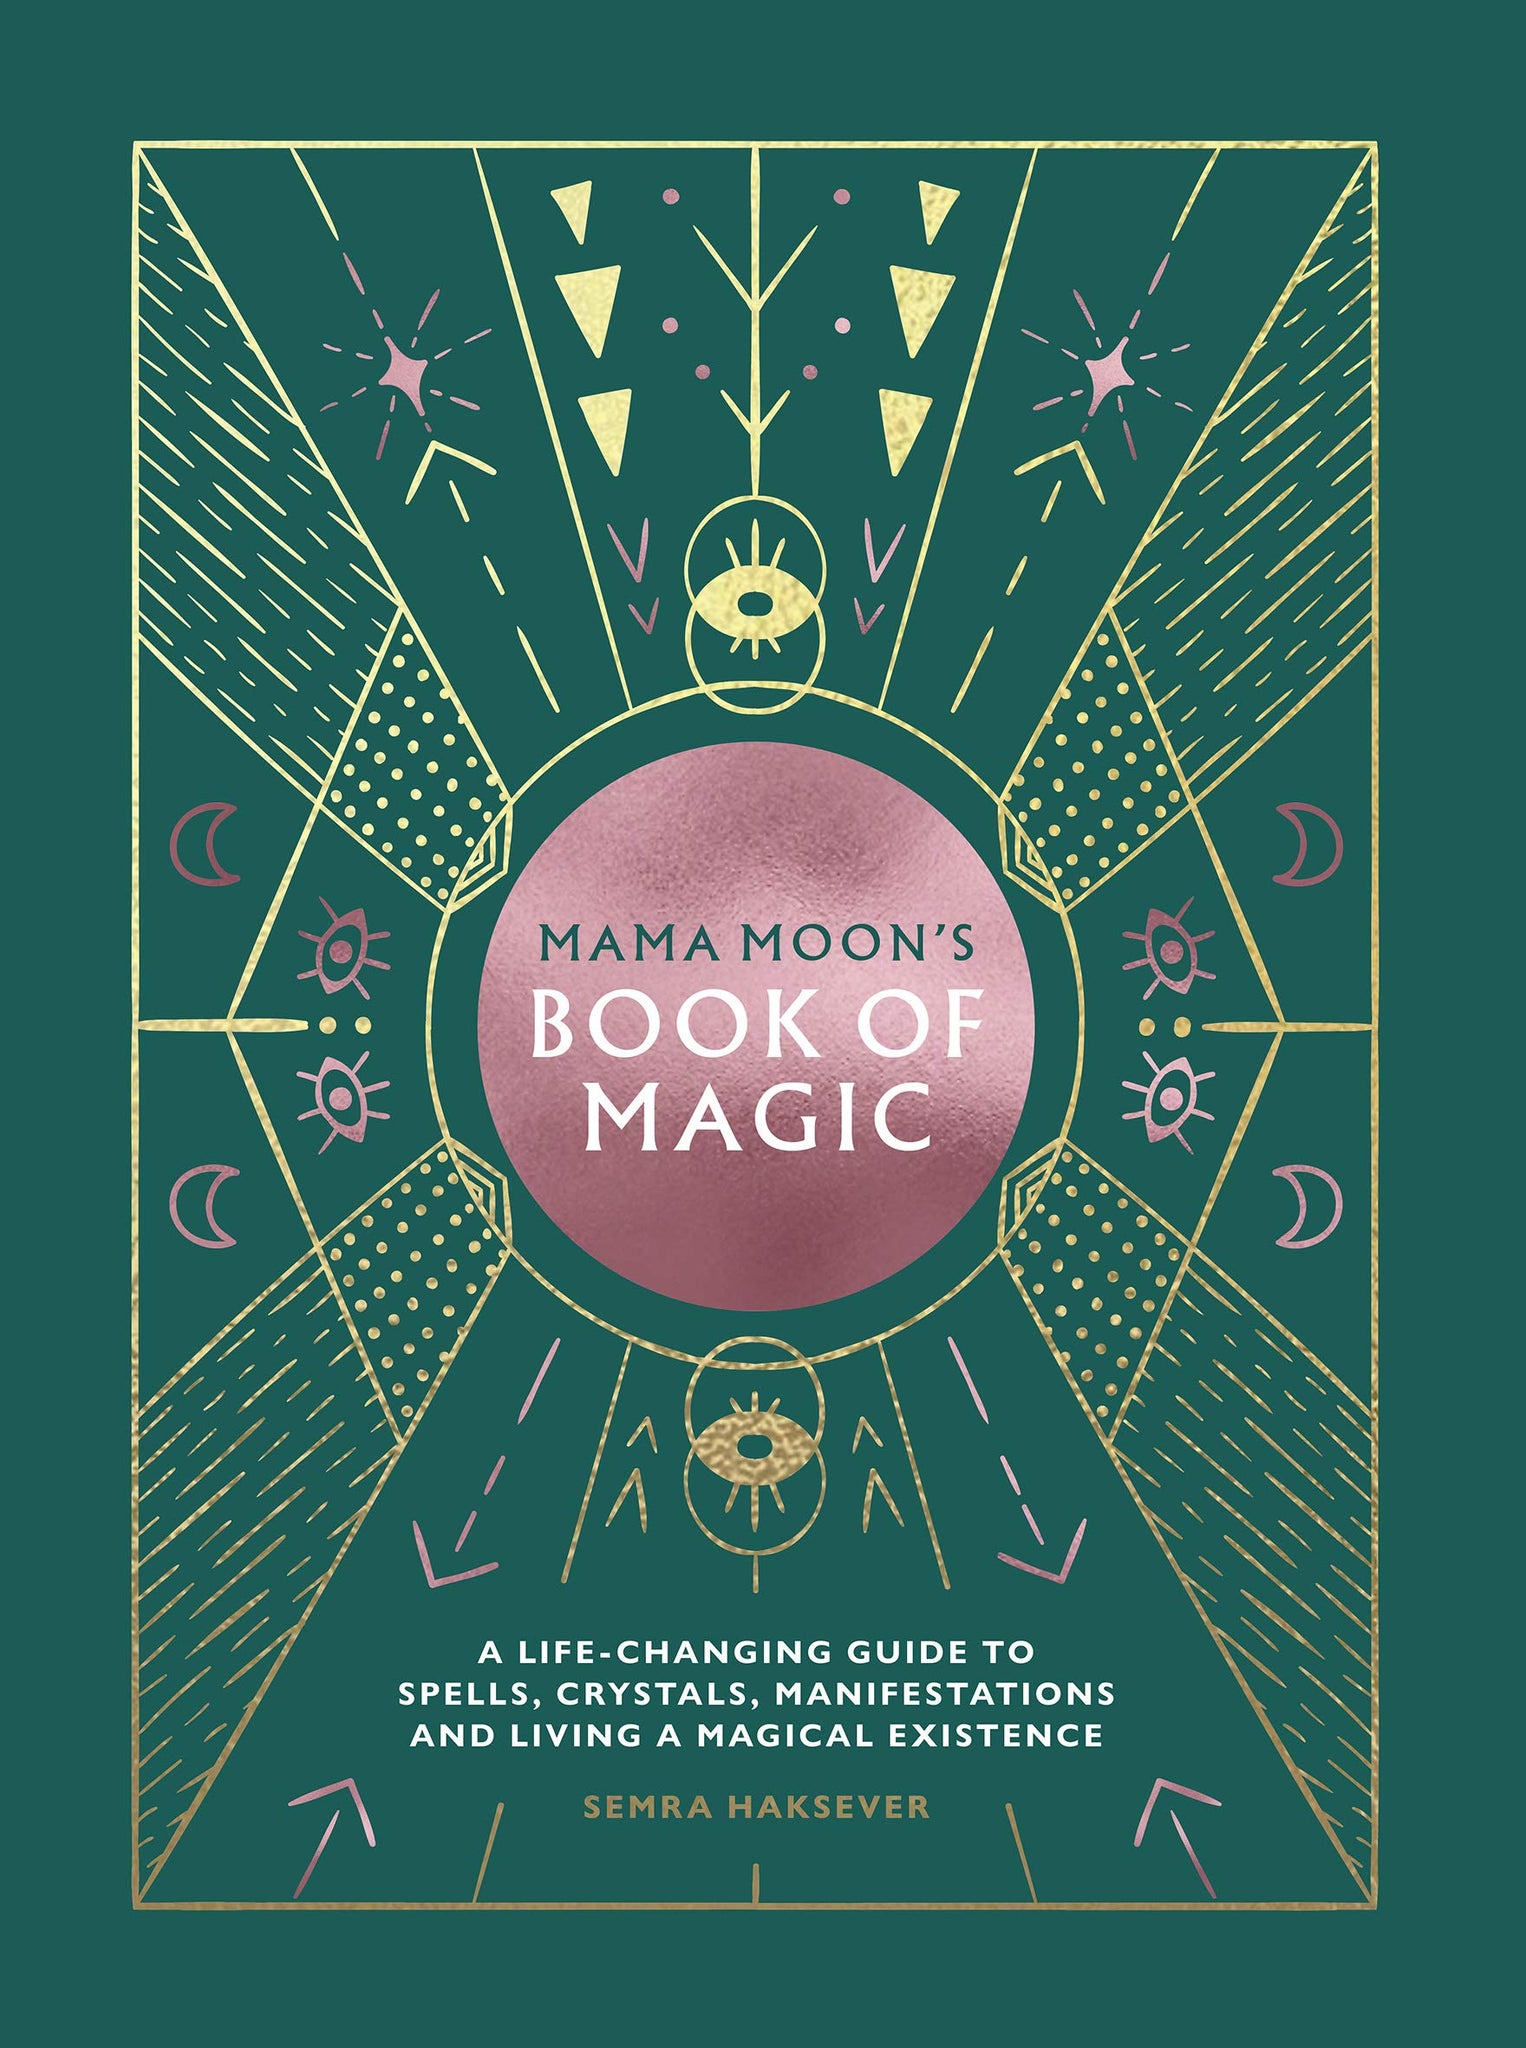 Mama Moon's Book of Magic: A Life-Changing Guide to Star Signs, Spells, Crystals, Manifestations and Living a Magical Existence by Semra Haksever